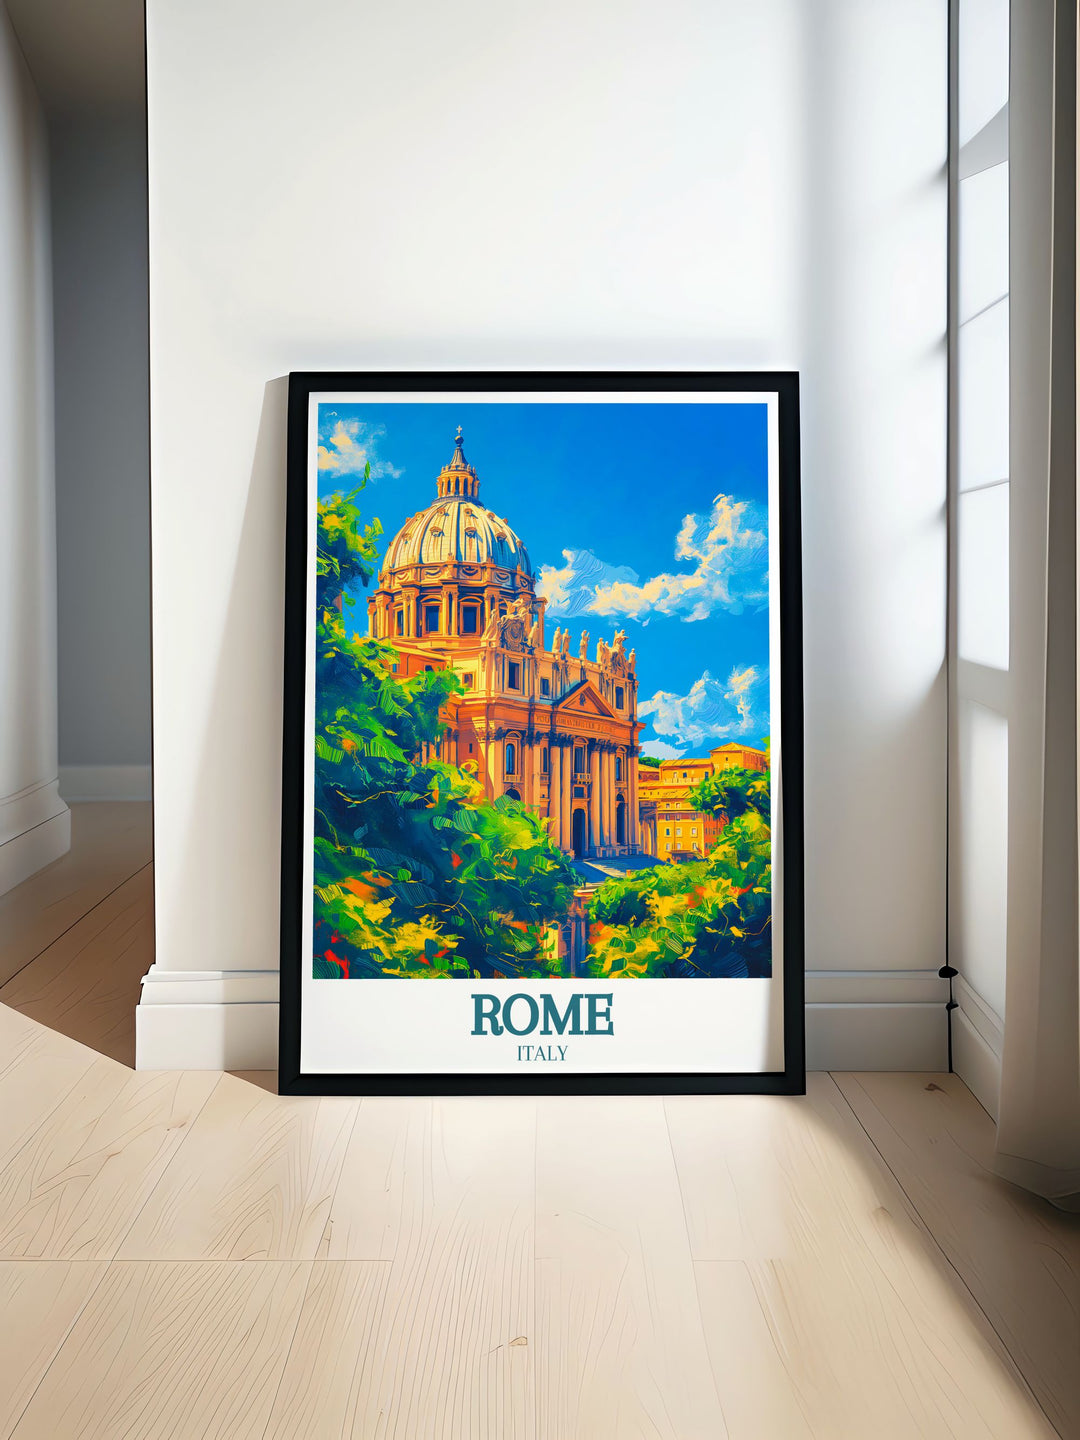 Stunning black and white Rome print featuring St Basilica Vatican City perfect for home decor and gifts including anniversaries birthdays and Christmas adding a touch of elegance to any space with fine line details and timeless appeal.